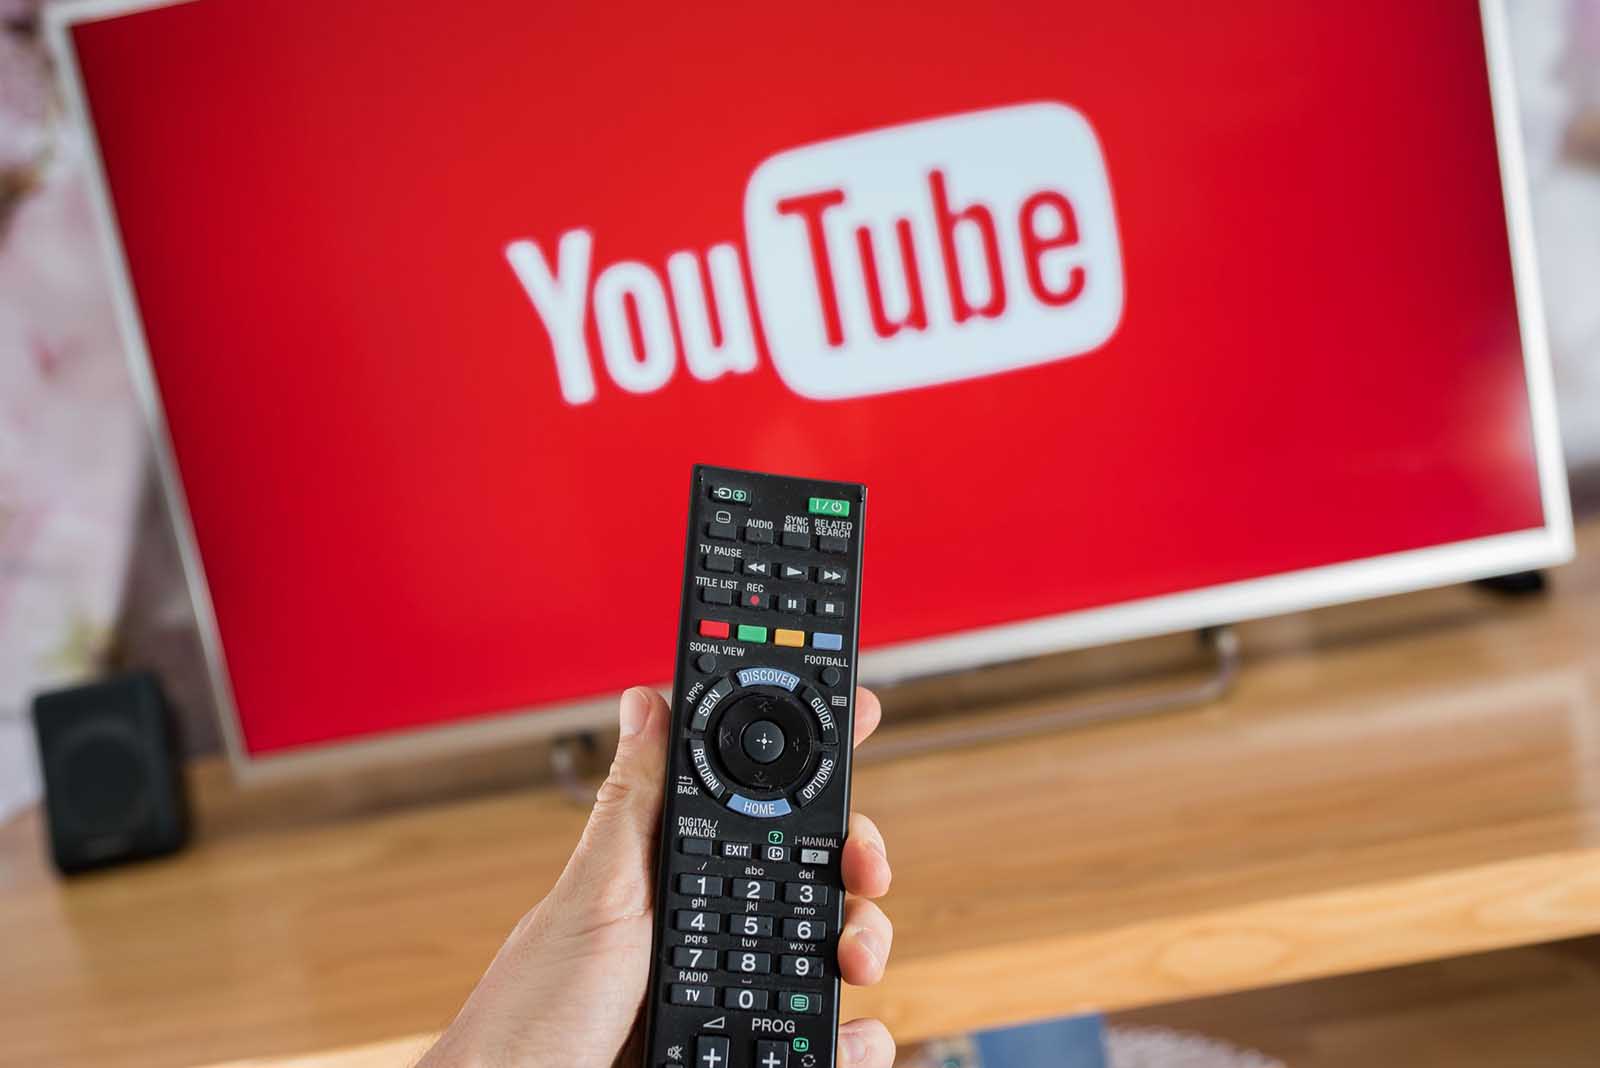 2020 saw a huge increase in streaming, which meant the Nielsen Company had to change their ratings system. See the craziest numbers from streaming in 2020.